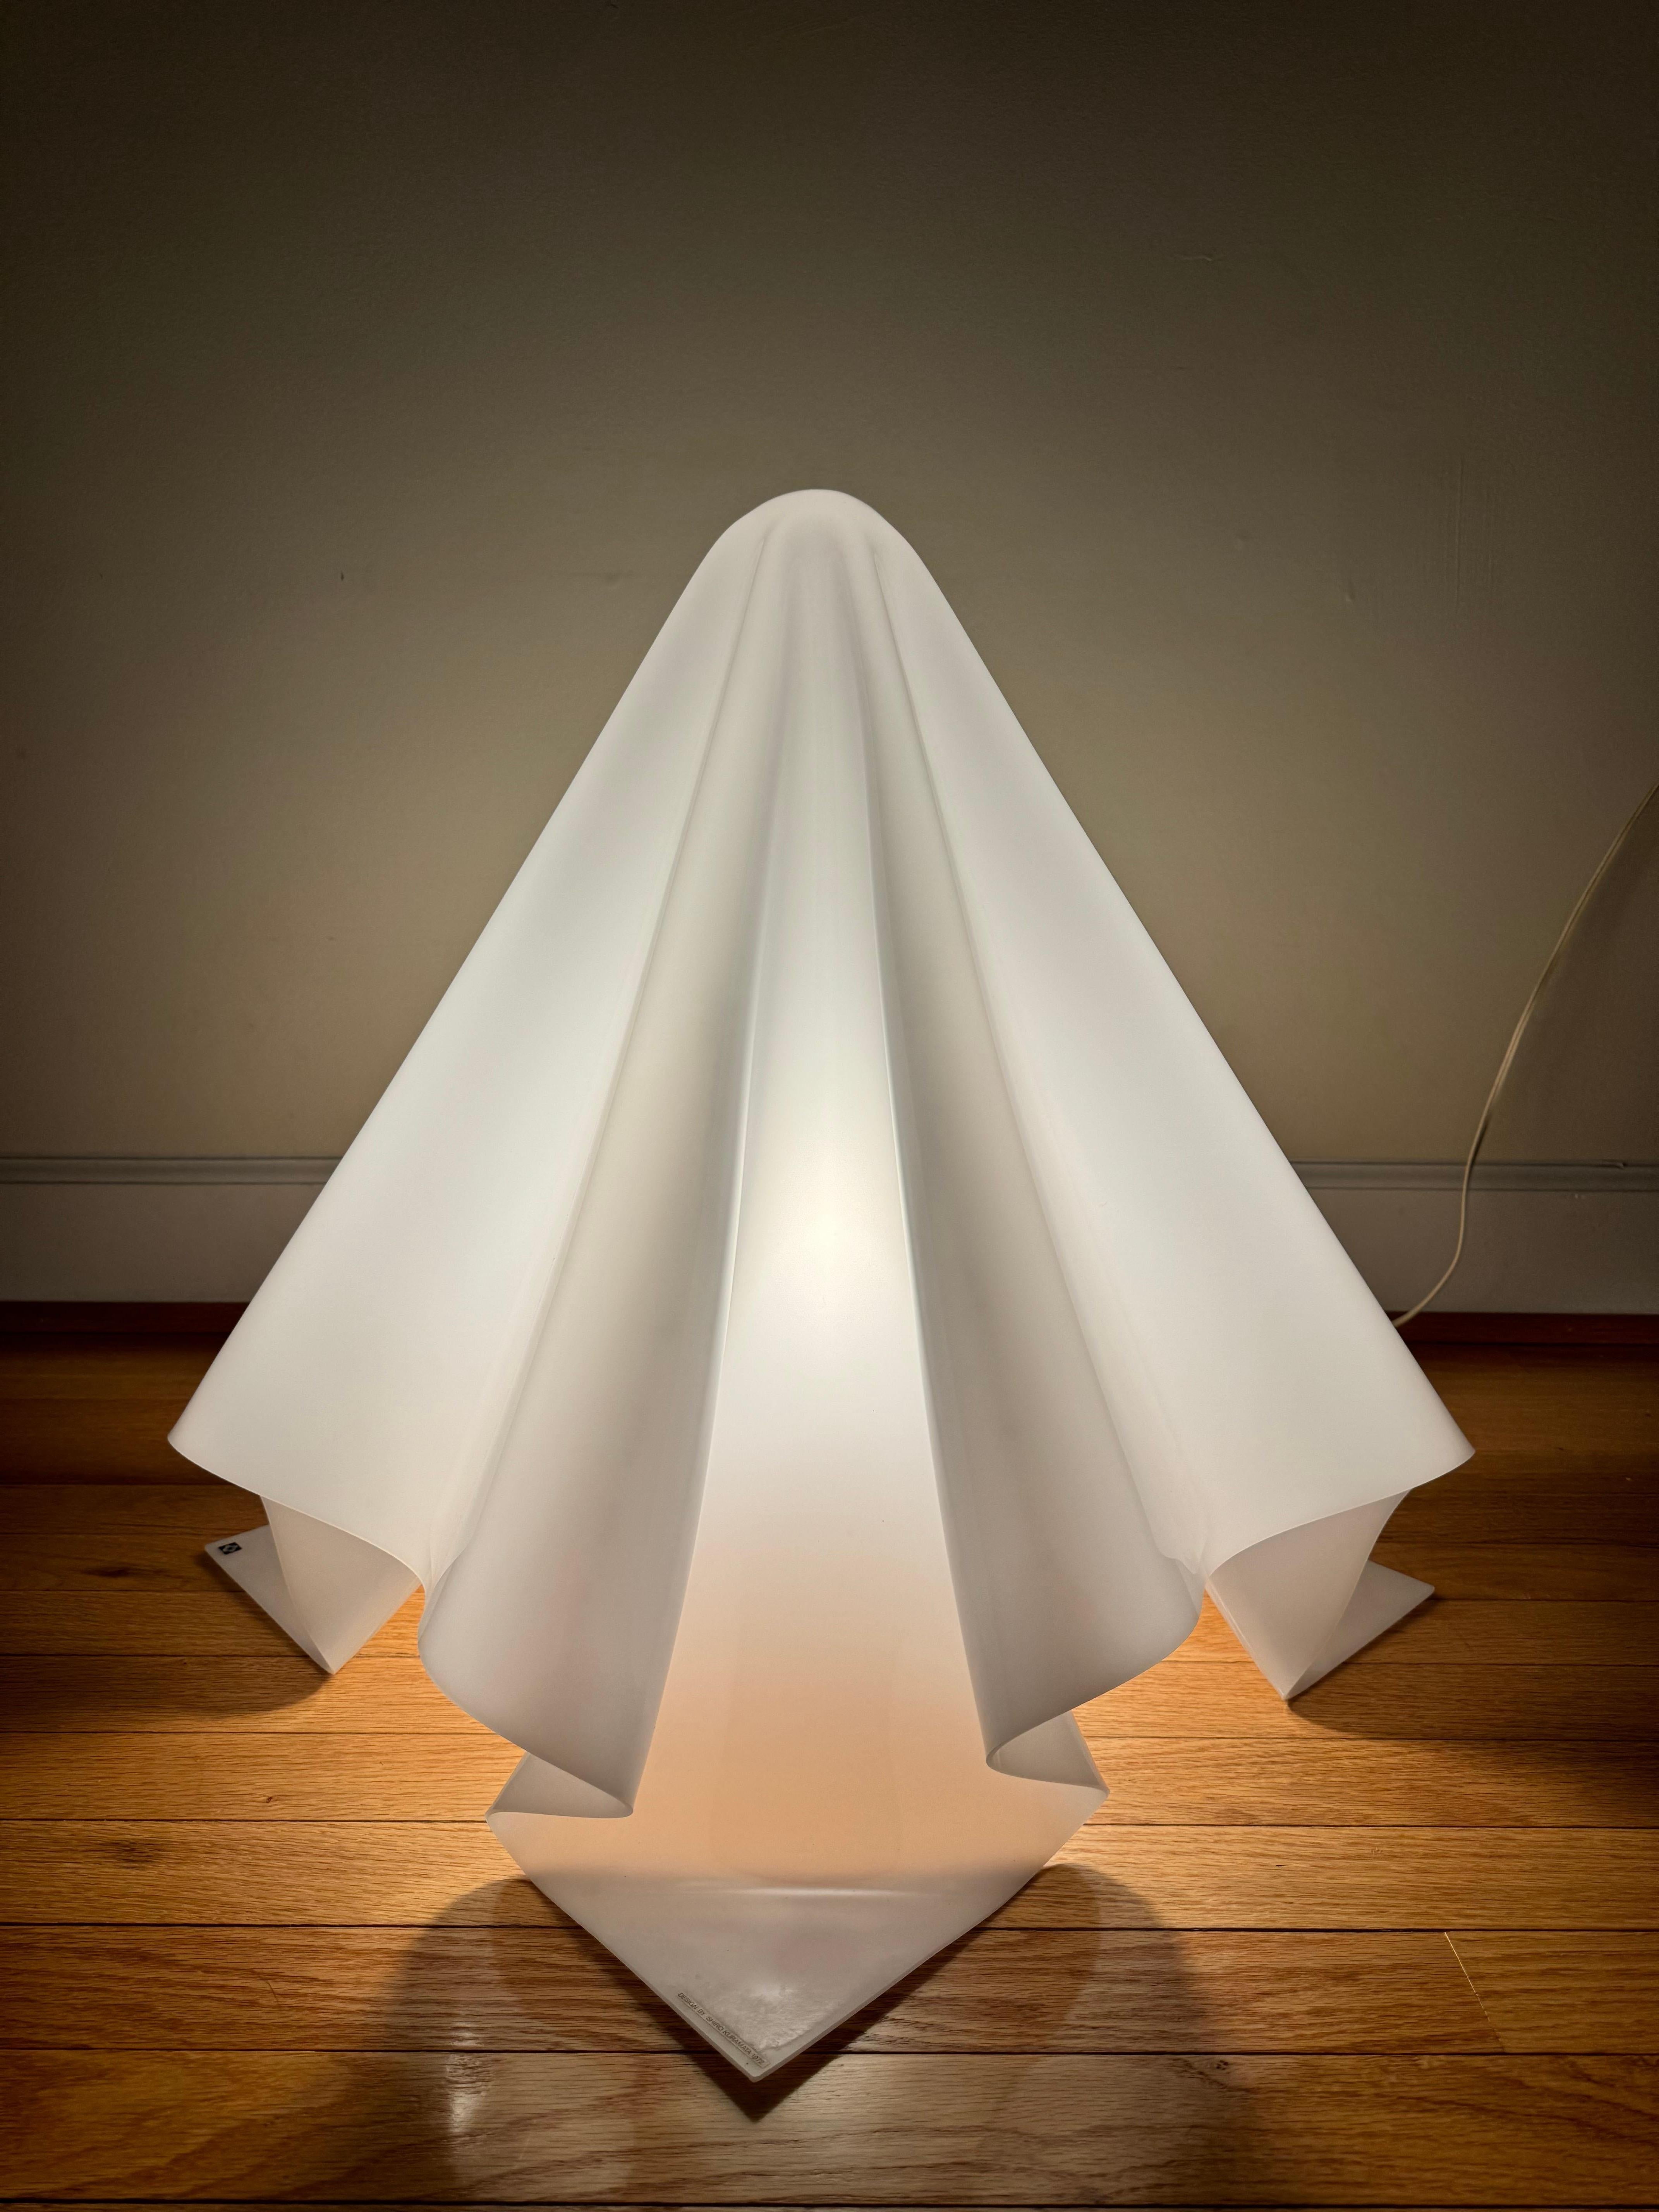 Rare early K-series (Oba- Q/Ghost) table lamp by Shiro Kuramata (Large) For Sale 4